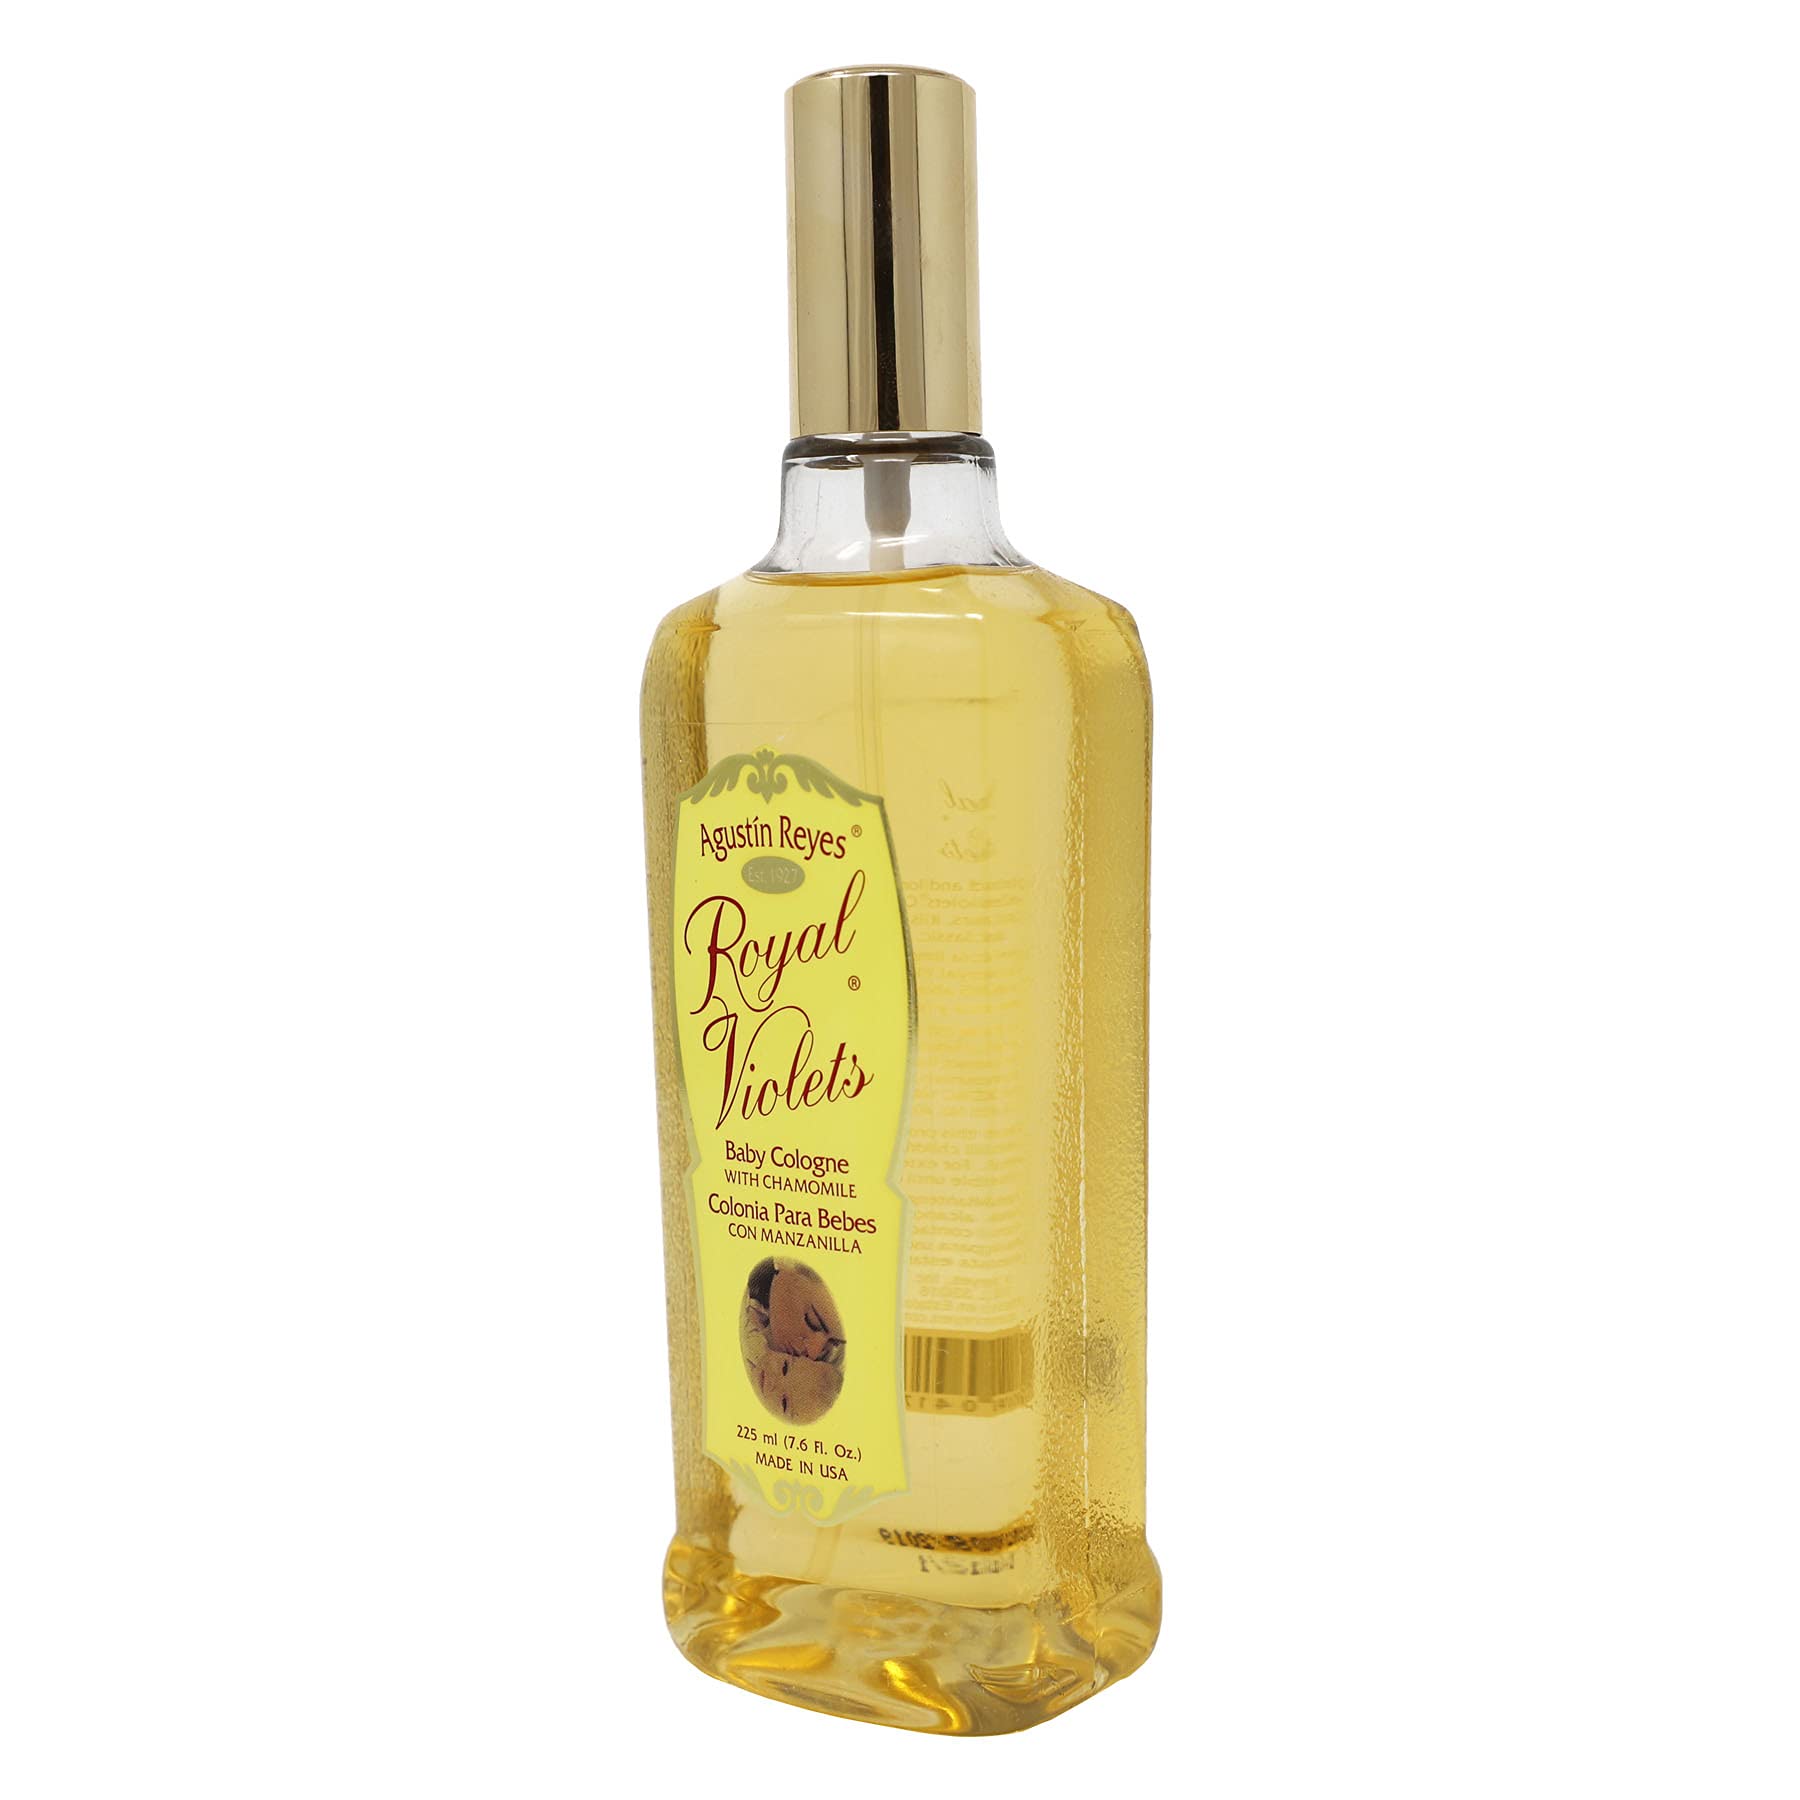 Royal Violets Baby Cologne, with Chamomile to Gently Refresh Your Baby, Delicate Scent, 7.6 Fl Oz, Spray Bottle.